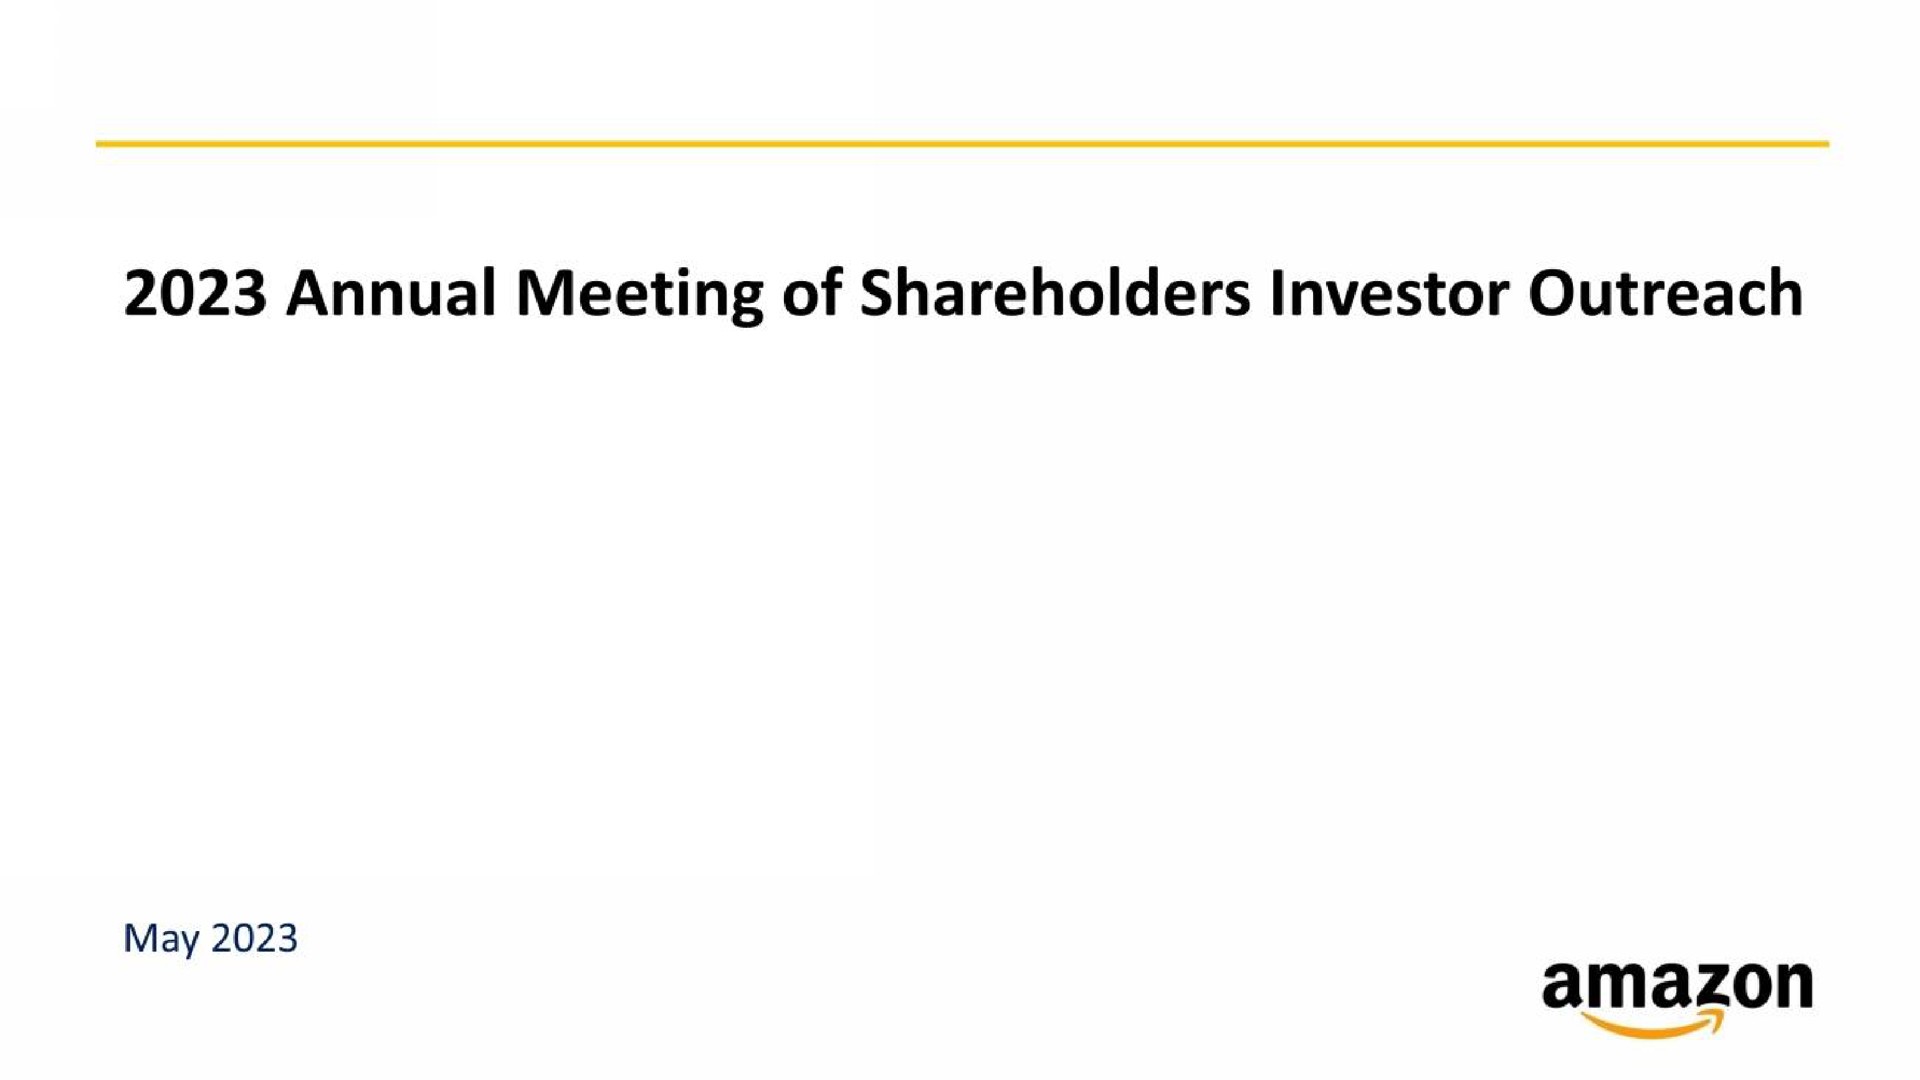 annual meeting of shareholders investor outreach | Amazon